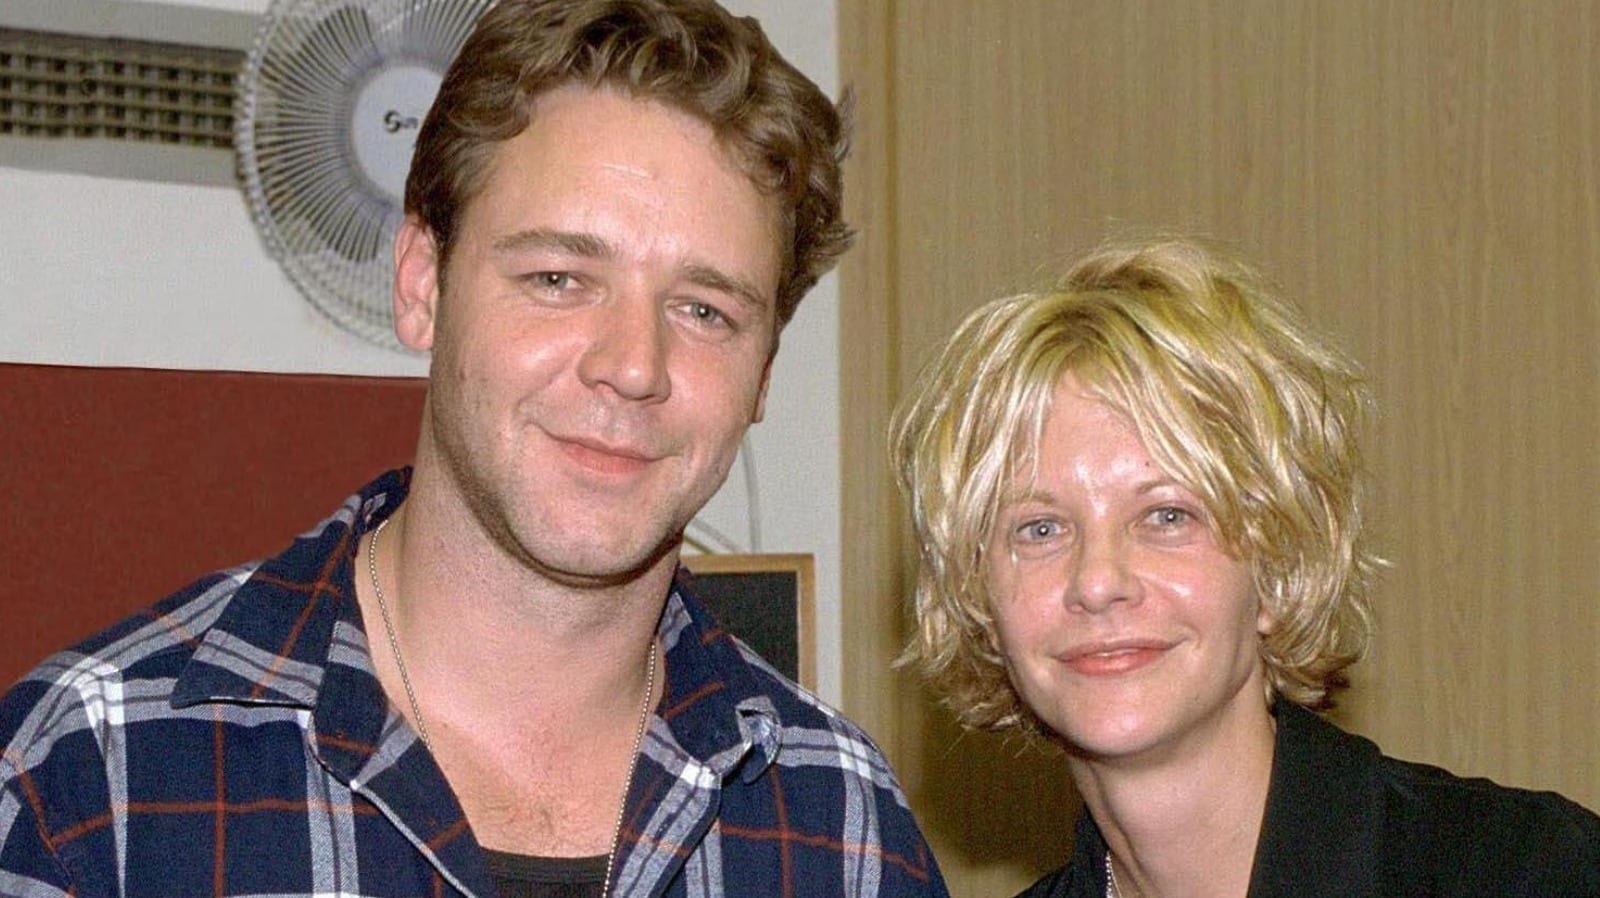 Russell Crowe and Meg Ryan